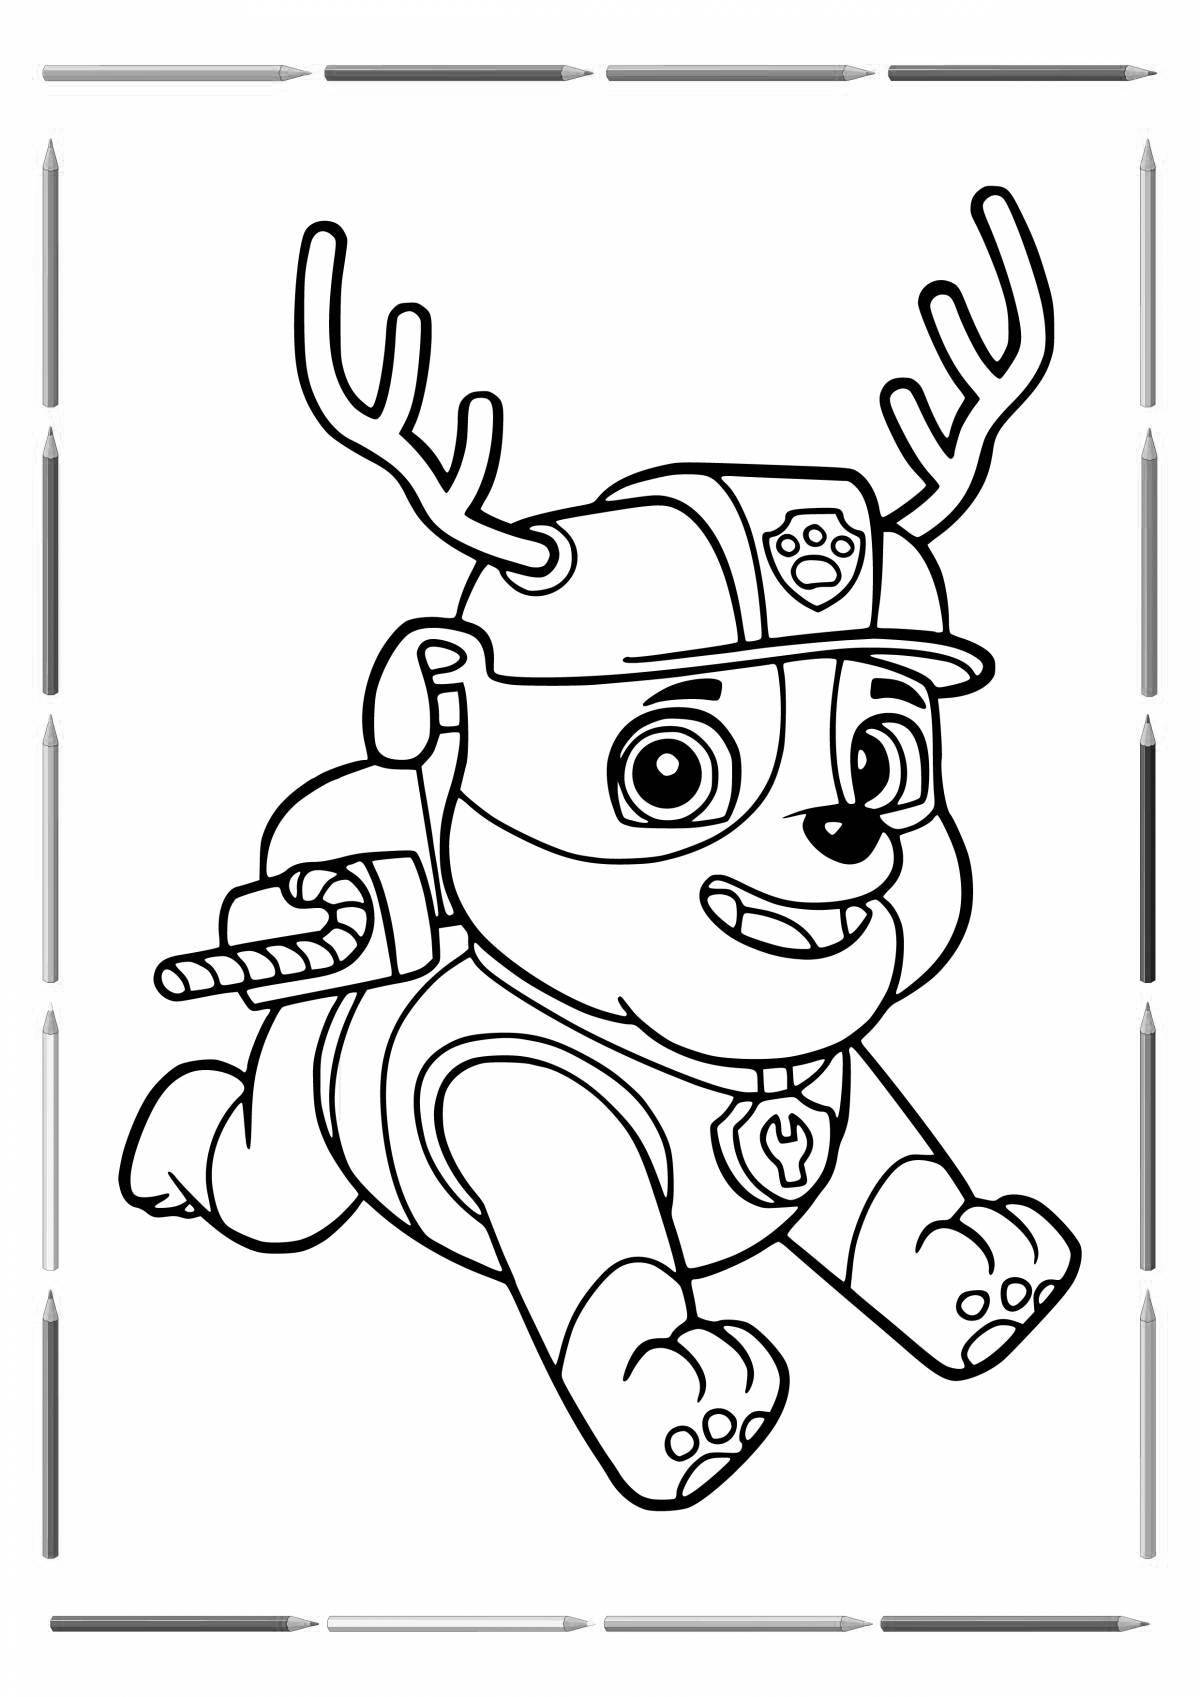 Color-explosive coloring paw patrol new year